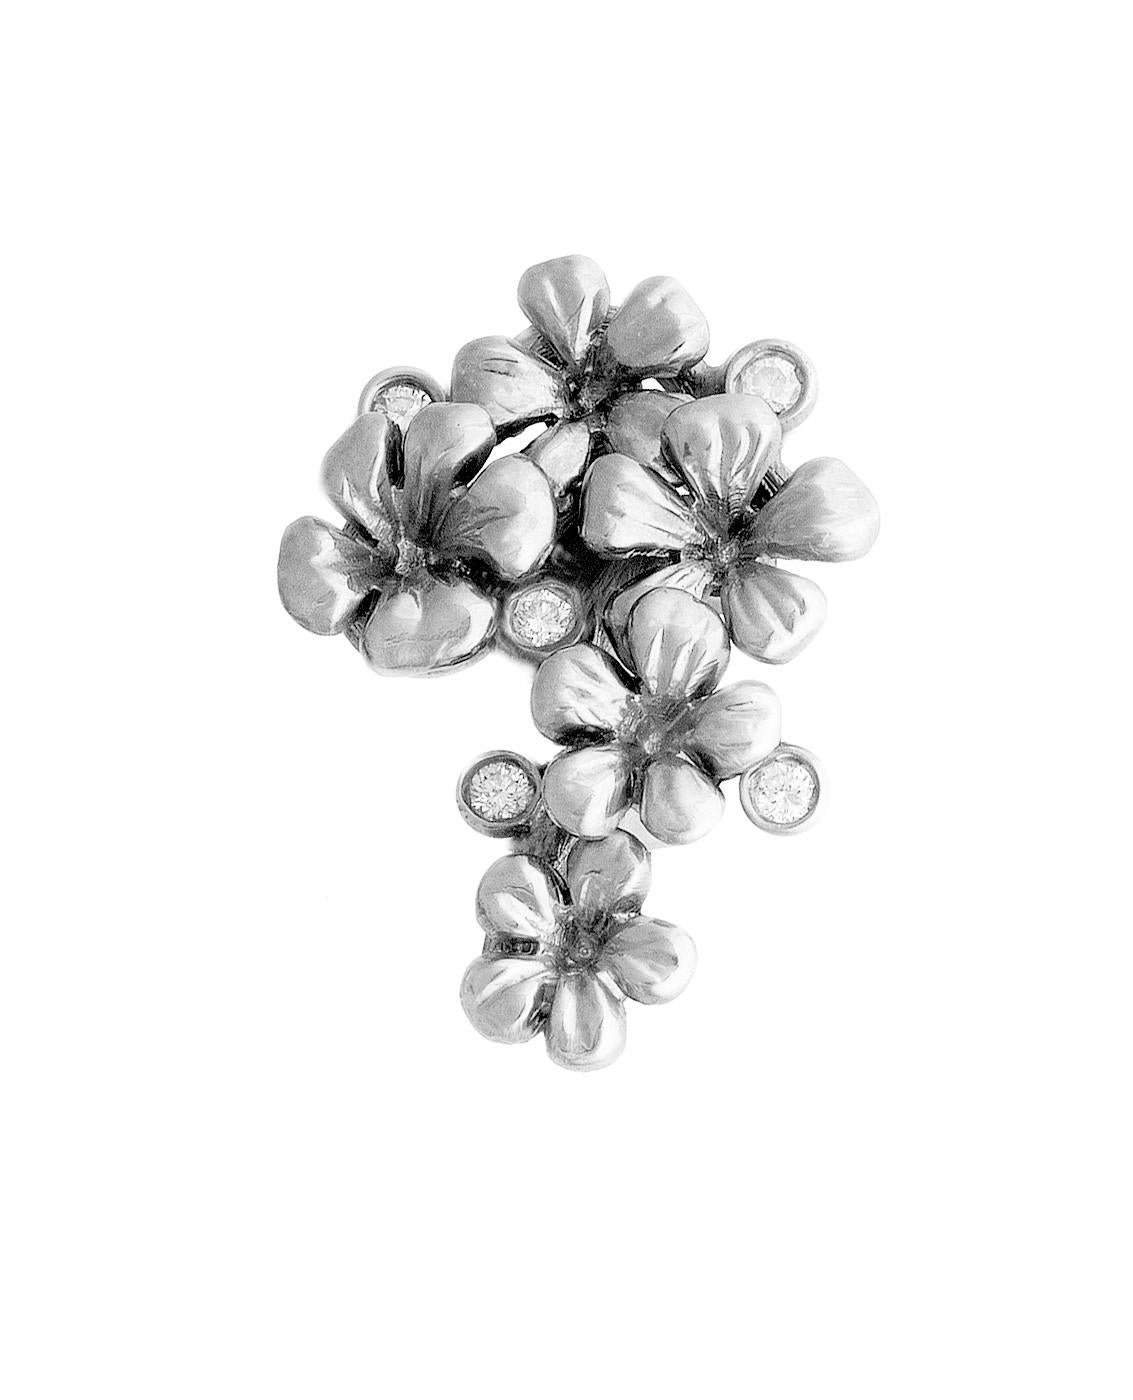 This Plum Blossom brooch is made of 18 karat white gold. It features 5 round diamonds and a removable natural emerald drop (3.96 carats, 13.5x7.5mm) that can be taken off. This jewelry collection was featured in Vogue UA and designed by the